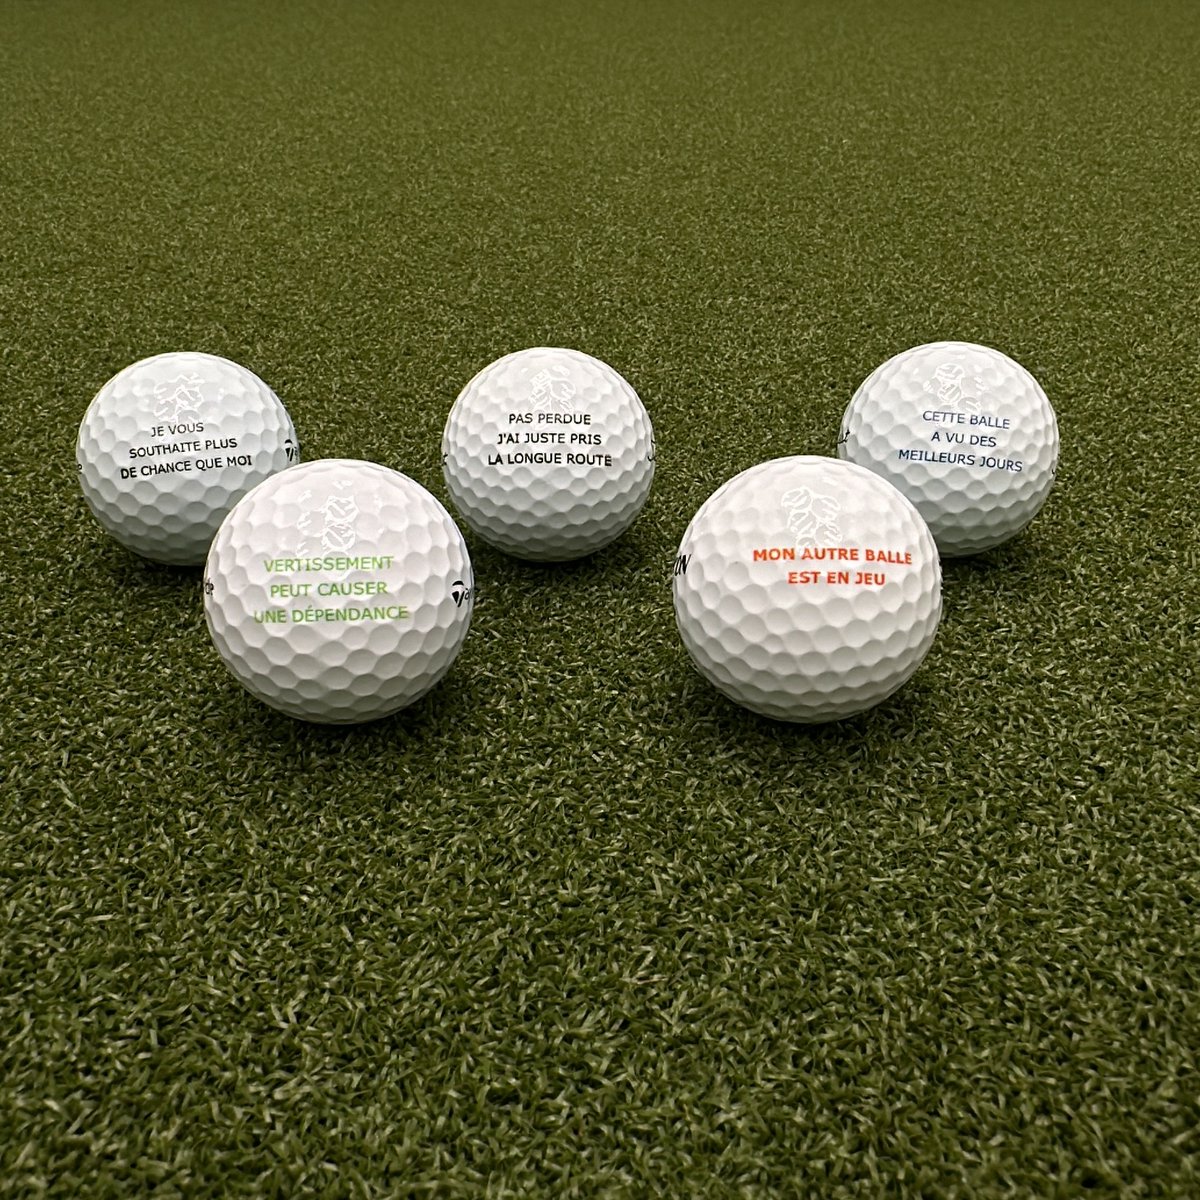 PERSONALIZED GOLF BALLS ARE AVAILABLE NOW! 🙌 Put a personal twist on your golf balls this season with our selection of customizable golf balls. 🔥 ⛳ Some limitations apply. Max 11 dozen per order. Shop now: bit.ly/3JGK5Tz